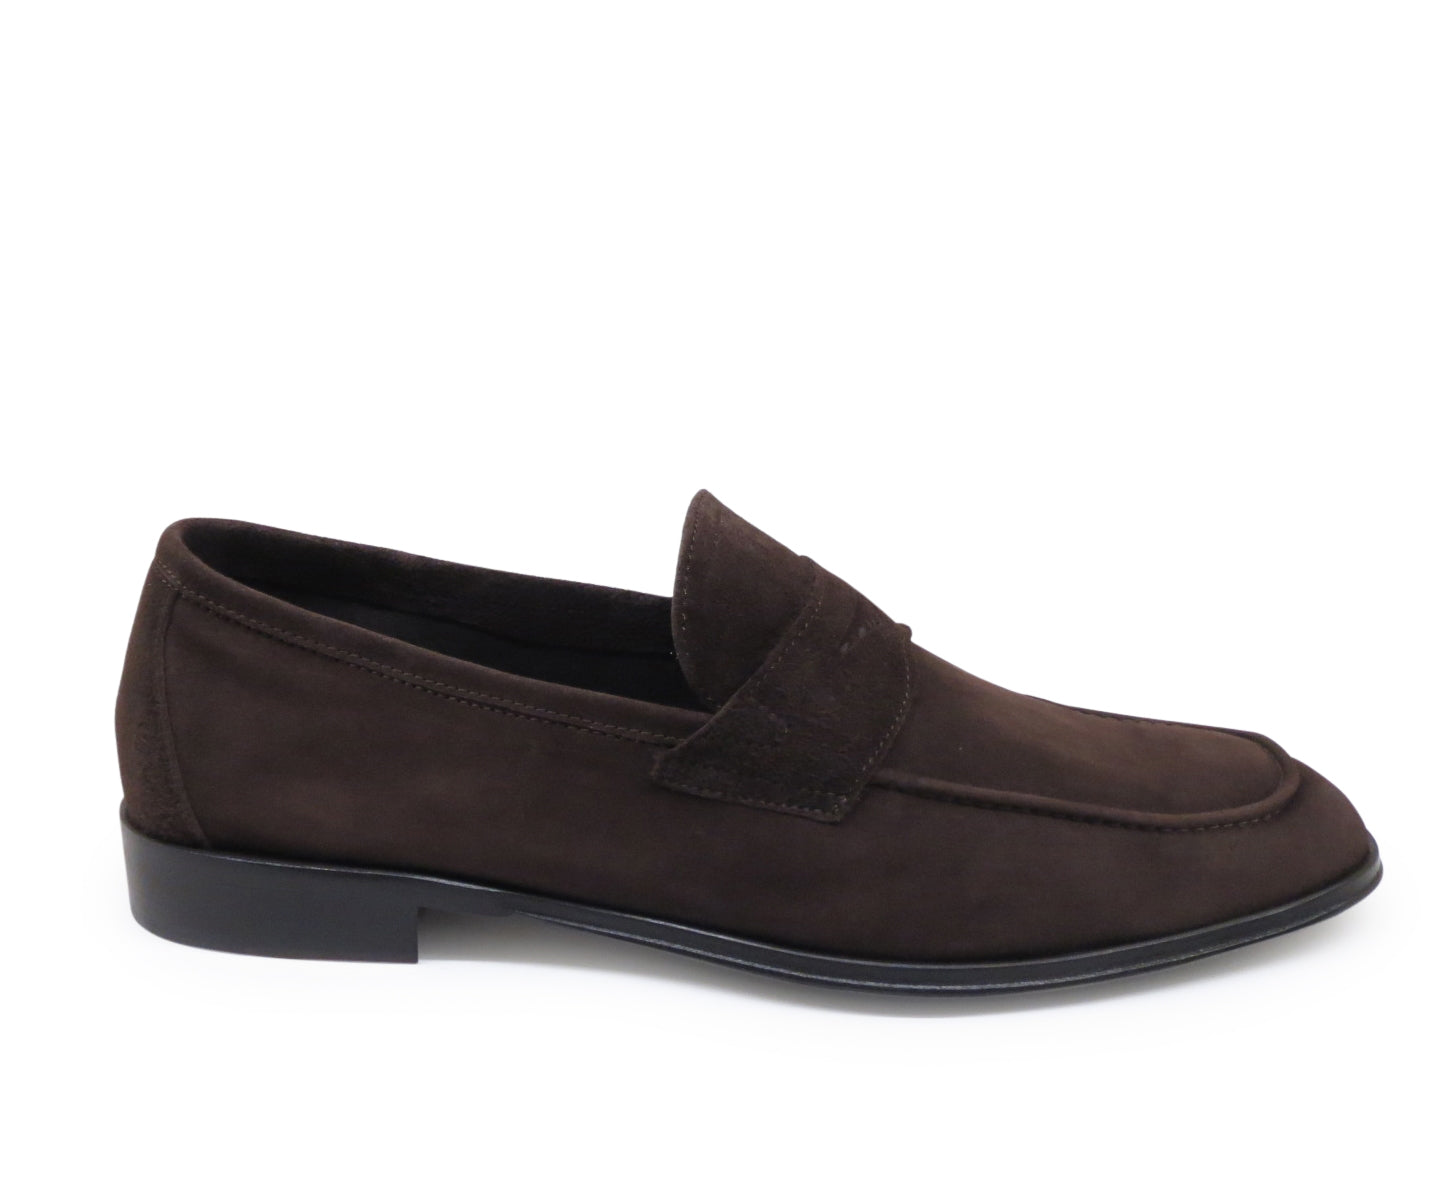 Calf Leather Suede Upper /Leather Sole/Sacchetto Manufacturing